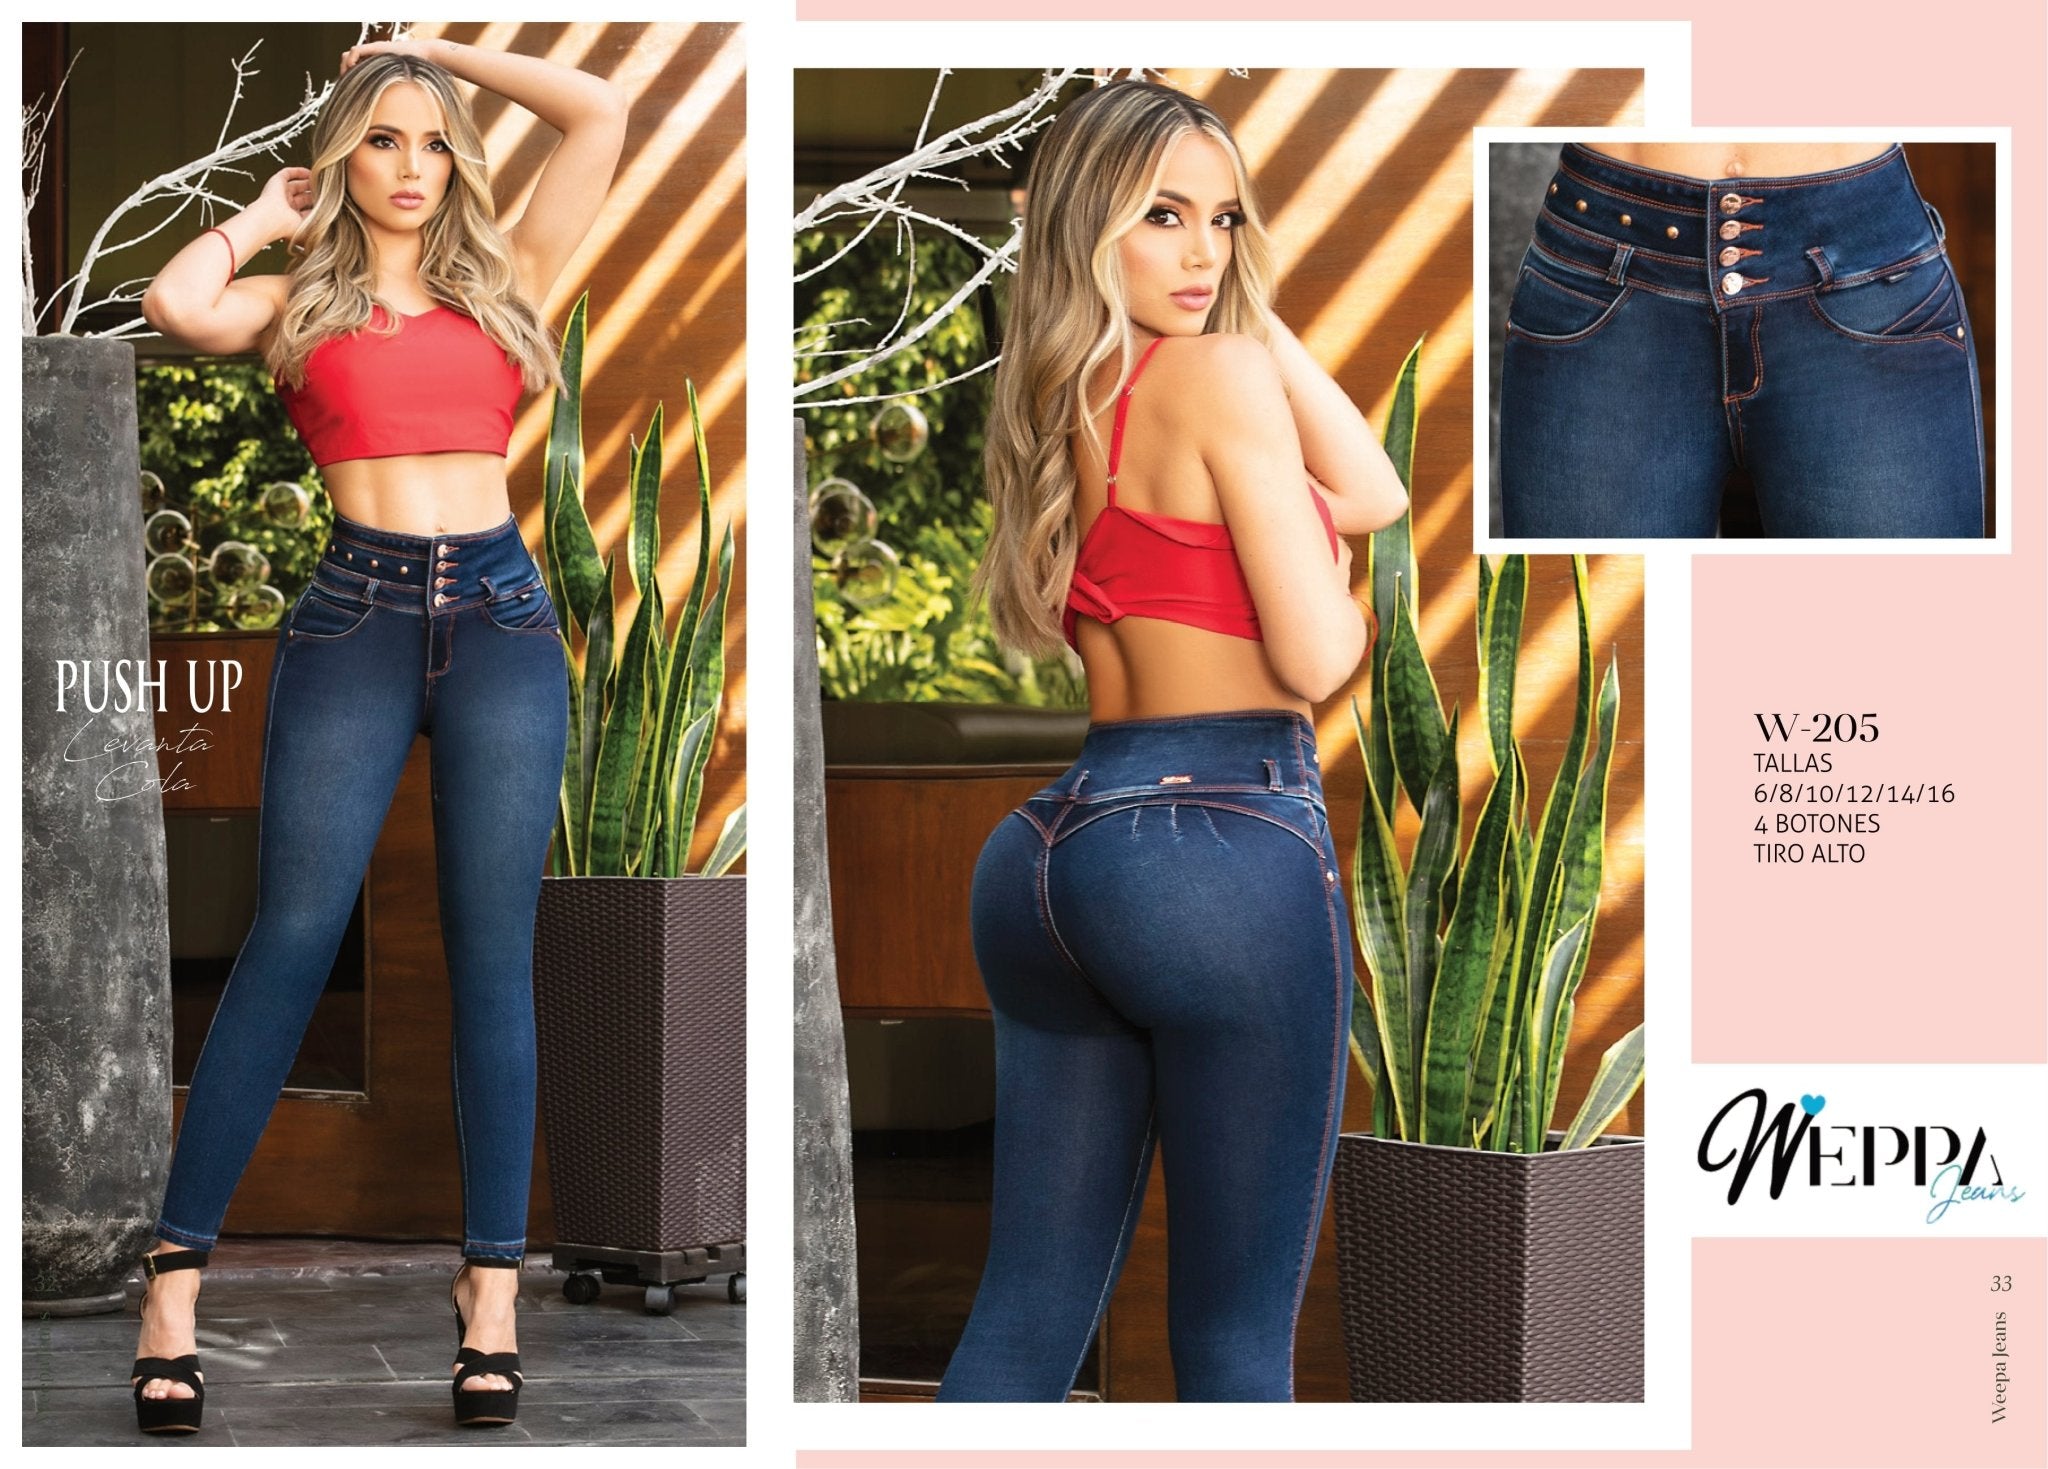 http://jdcolfashion.com/cdn/shop/products/w-205-100-authentic-colombian-push-up-jeans-by-weppa-jeans-504015.jpg?v=1684255708